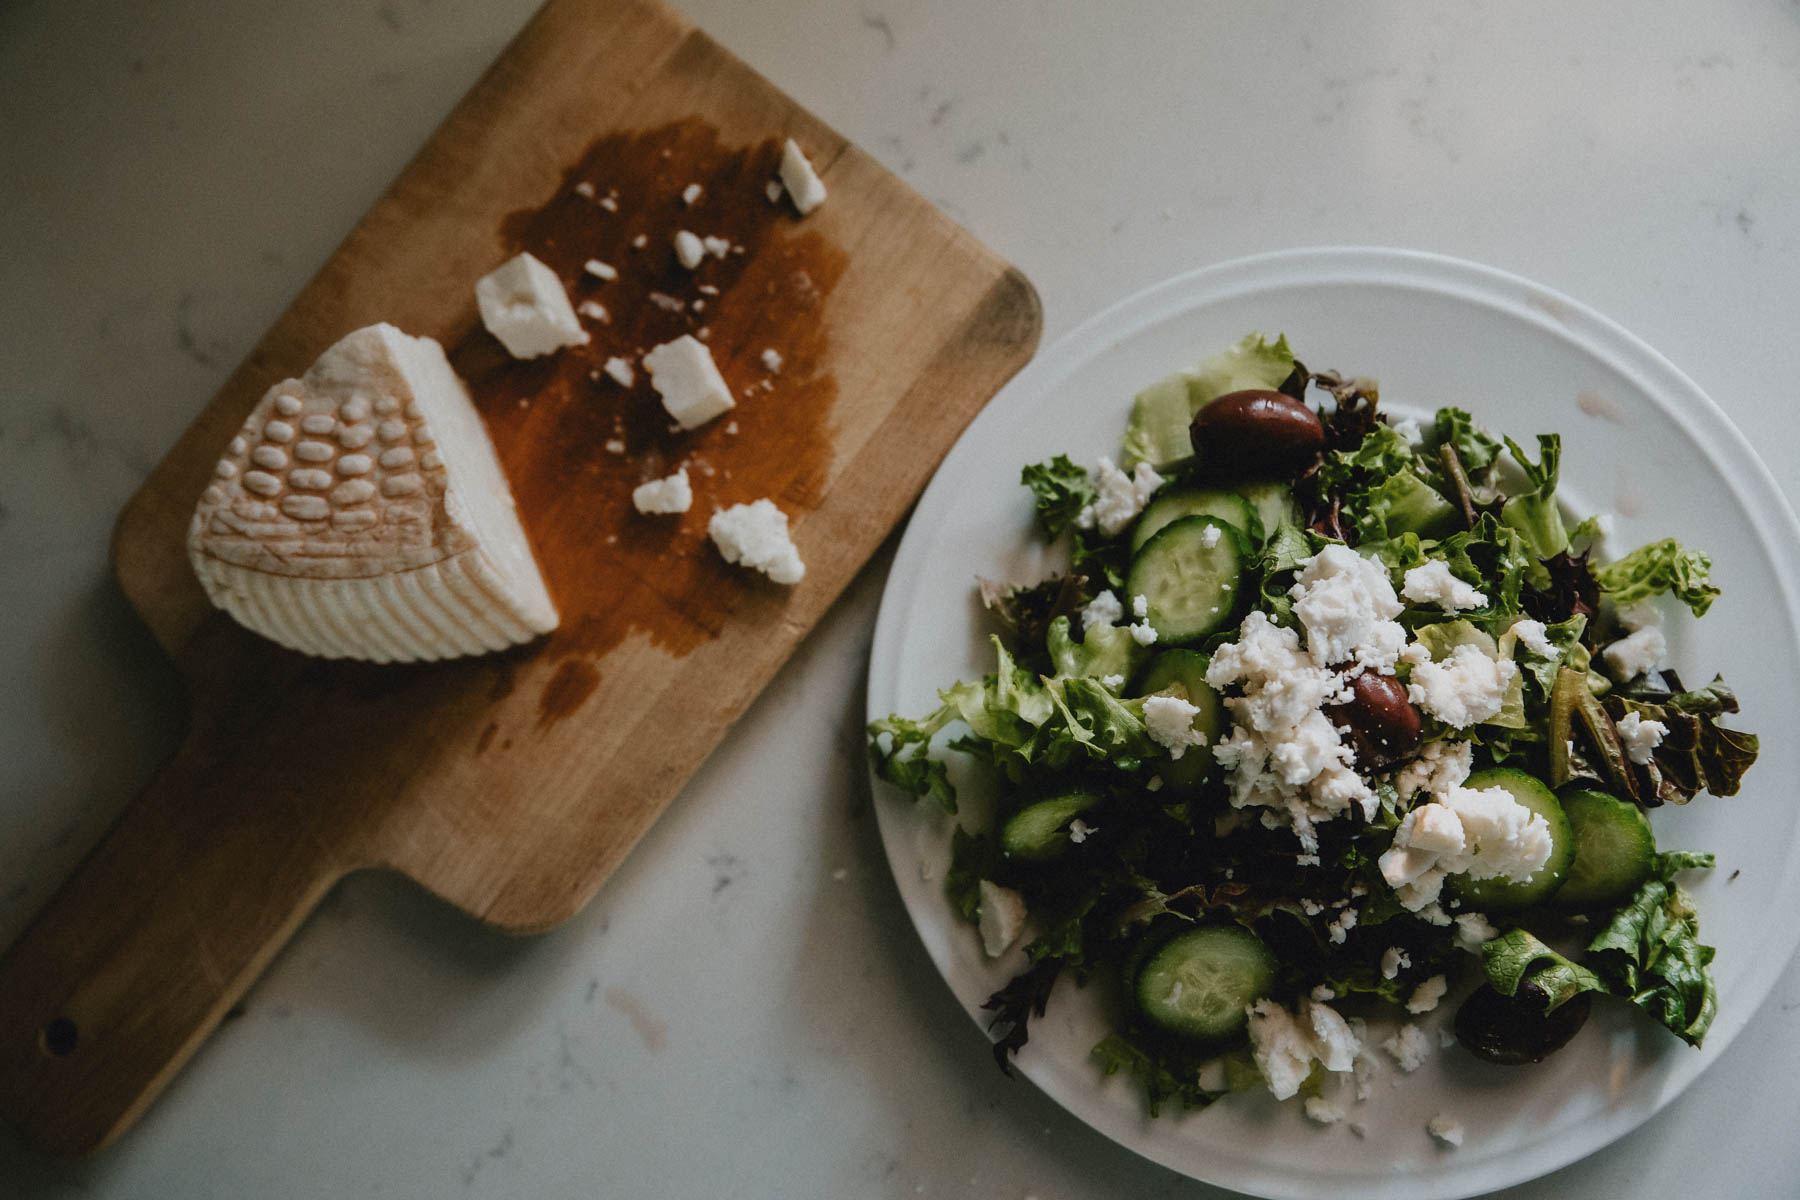 A wedge of goat milk feta cheese sits next to a Greek salad topped with crumbled feta